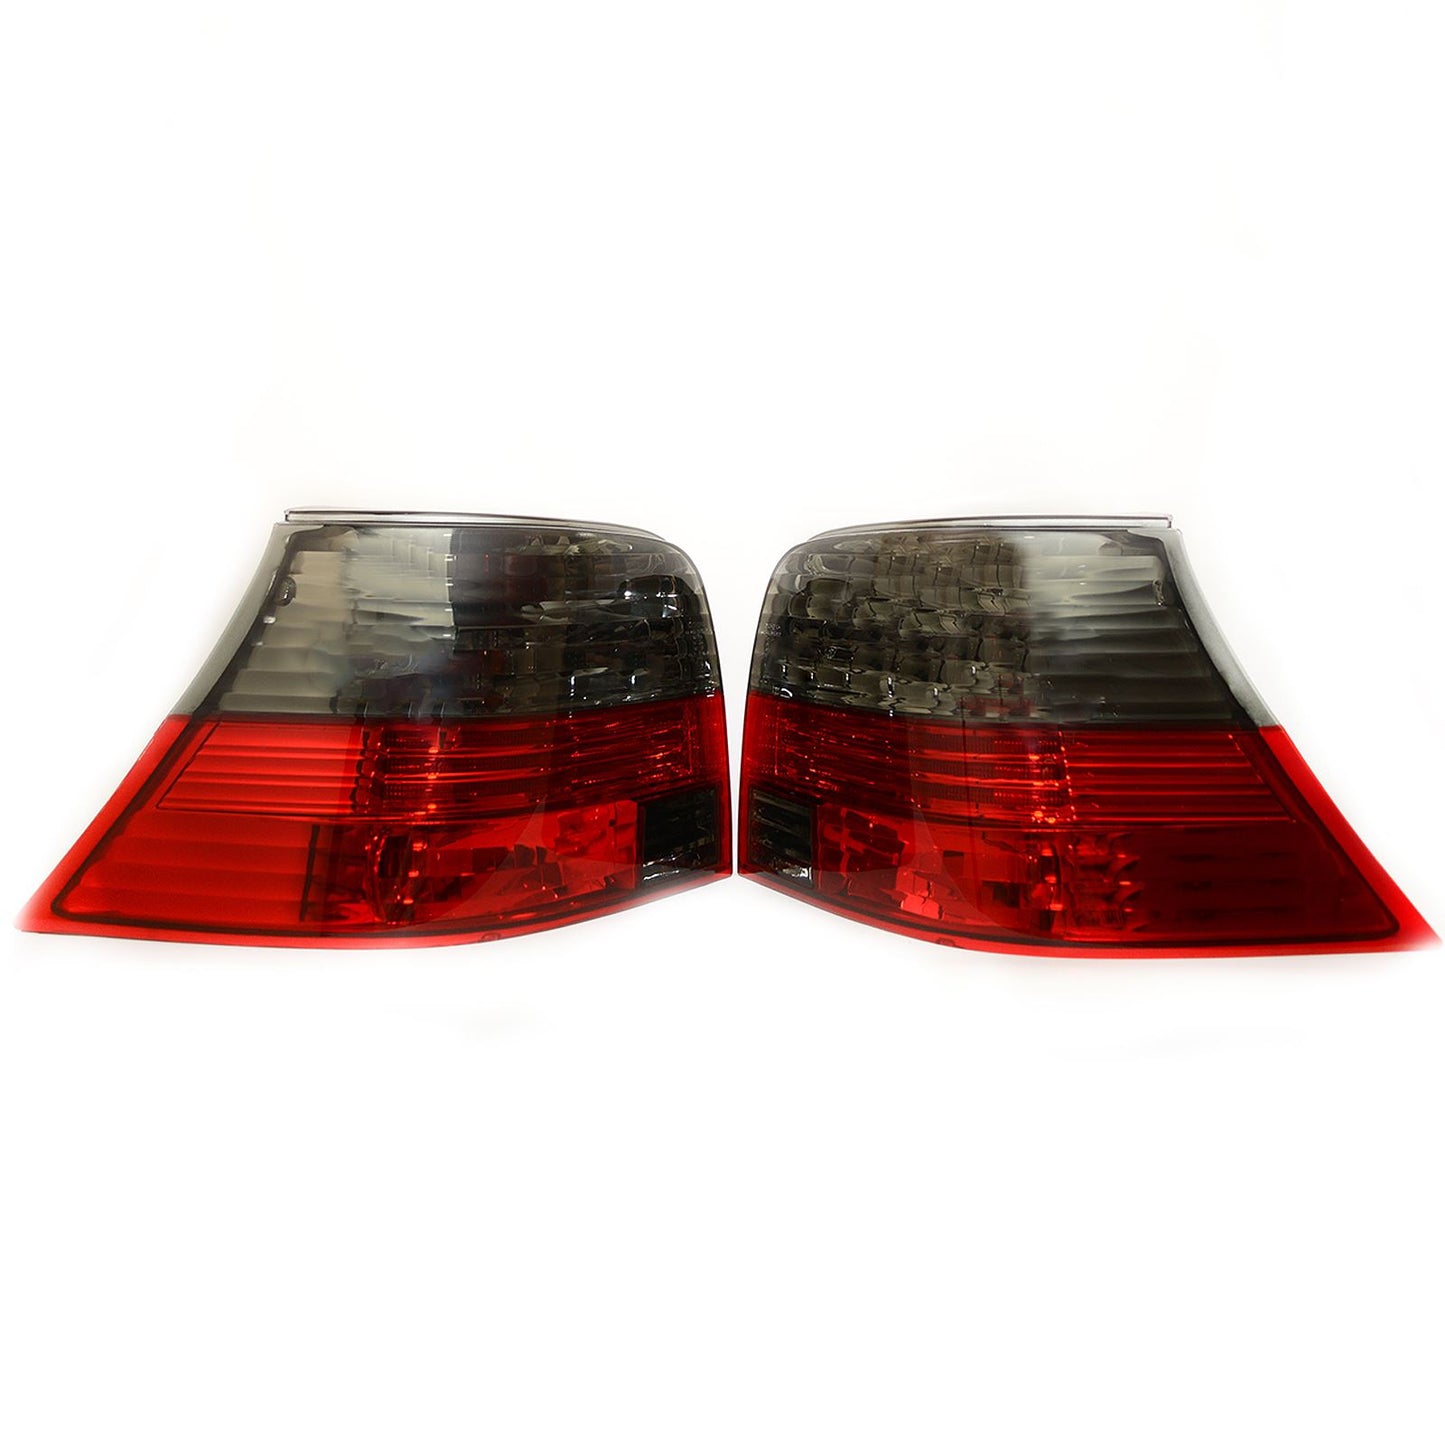 VW Golf MK4 Hatchback 1998-2004 Rear Tail Lights Crystal Red & Smoked Pair